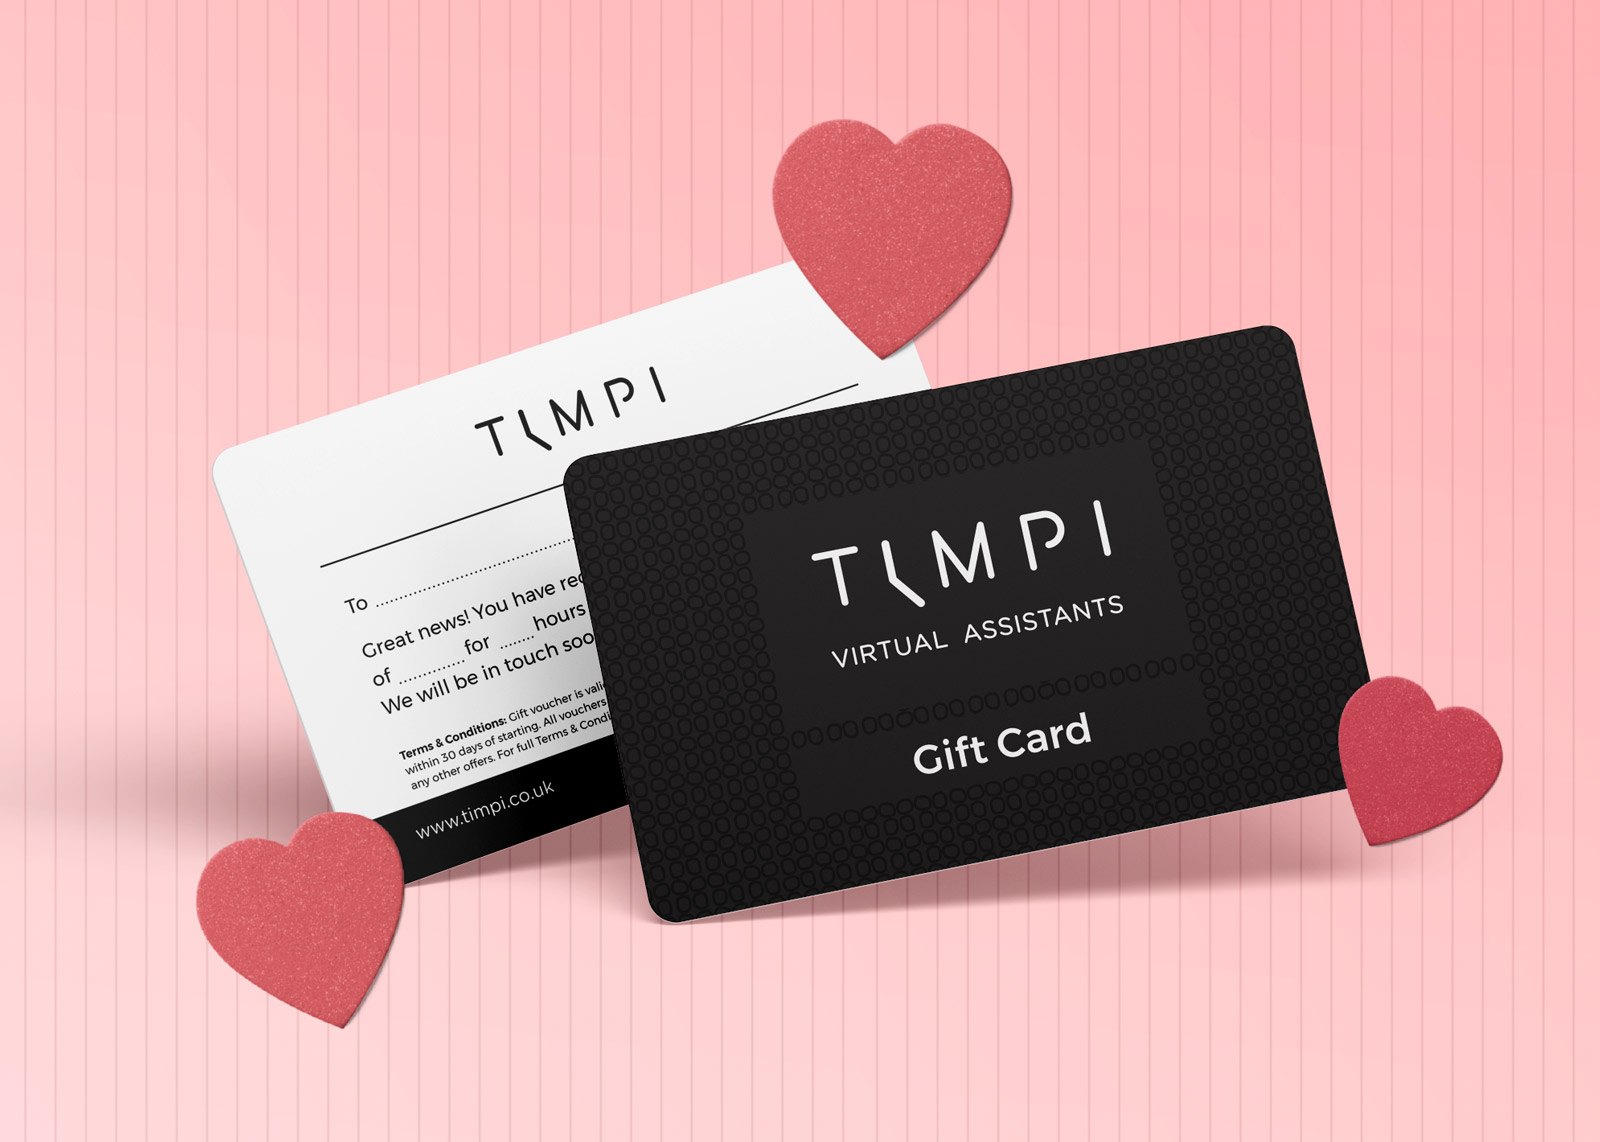 Timpi Virtual Assistants Gift Card